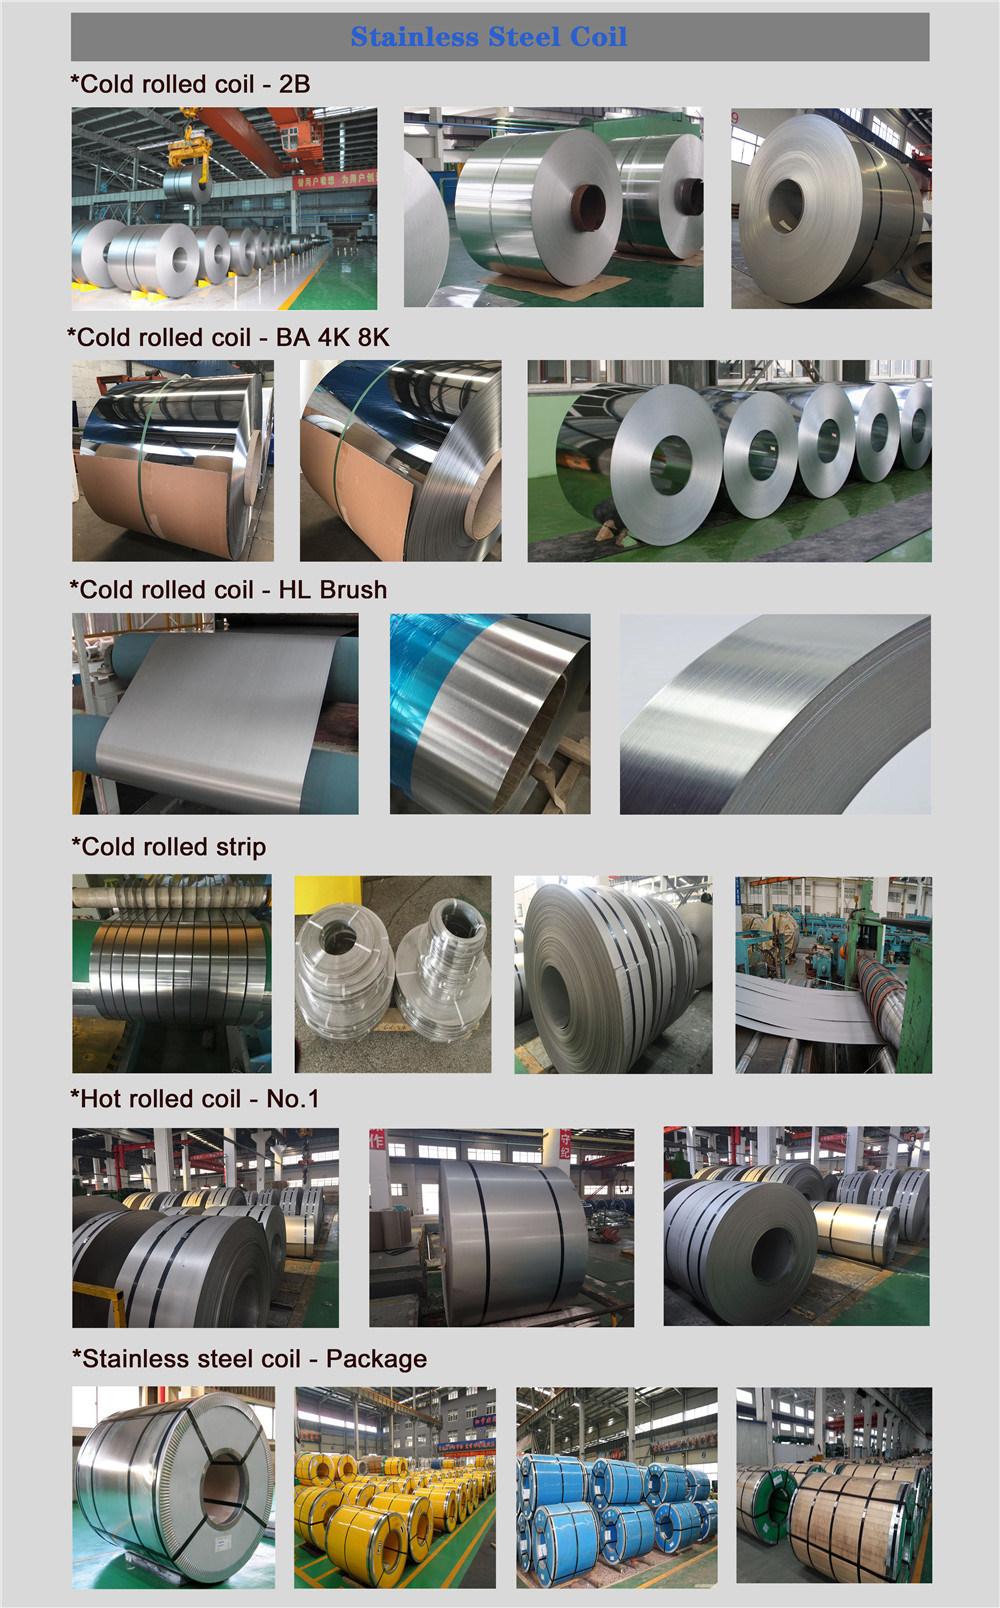 Wholesale Cold Rolled Stainless Steel Coil Grade 2b 304 310 316 321 with High Quality